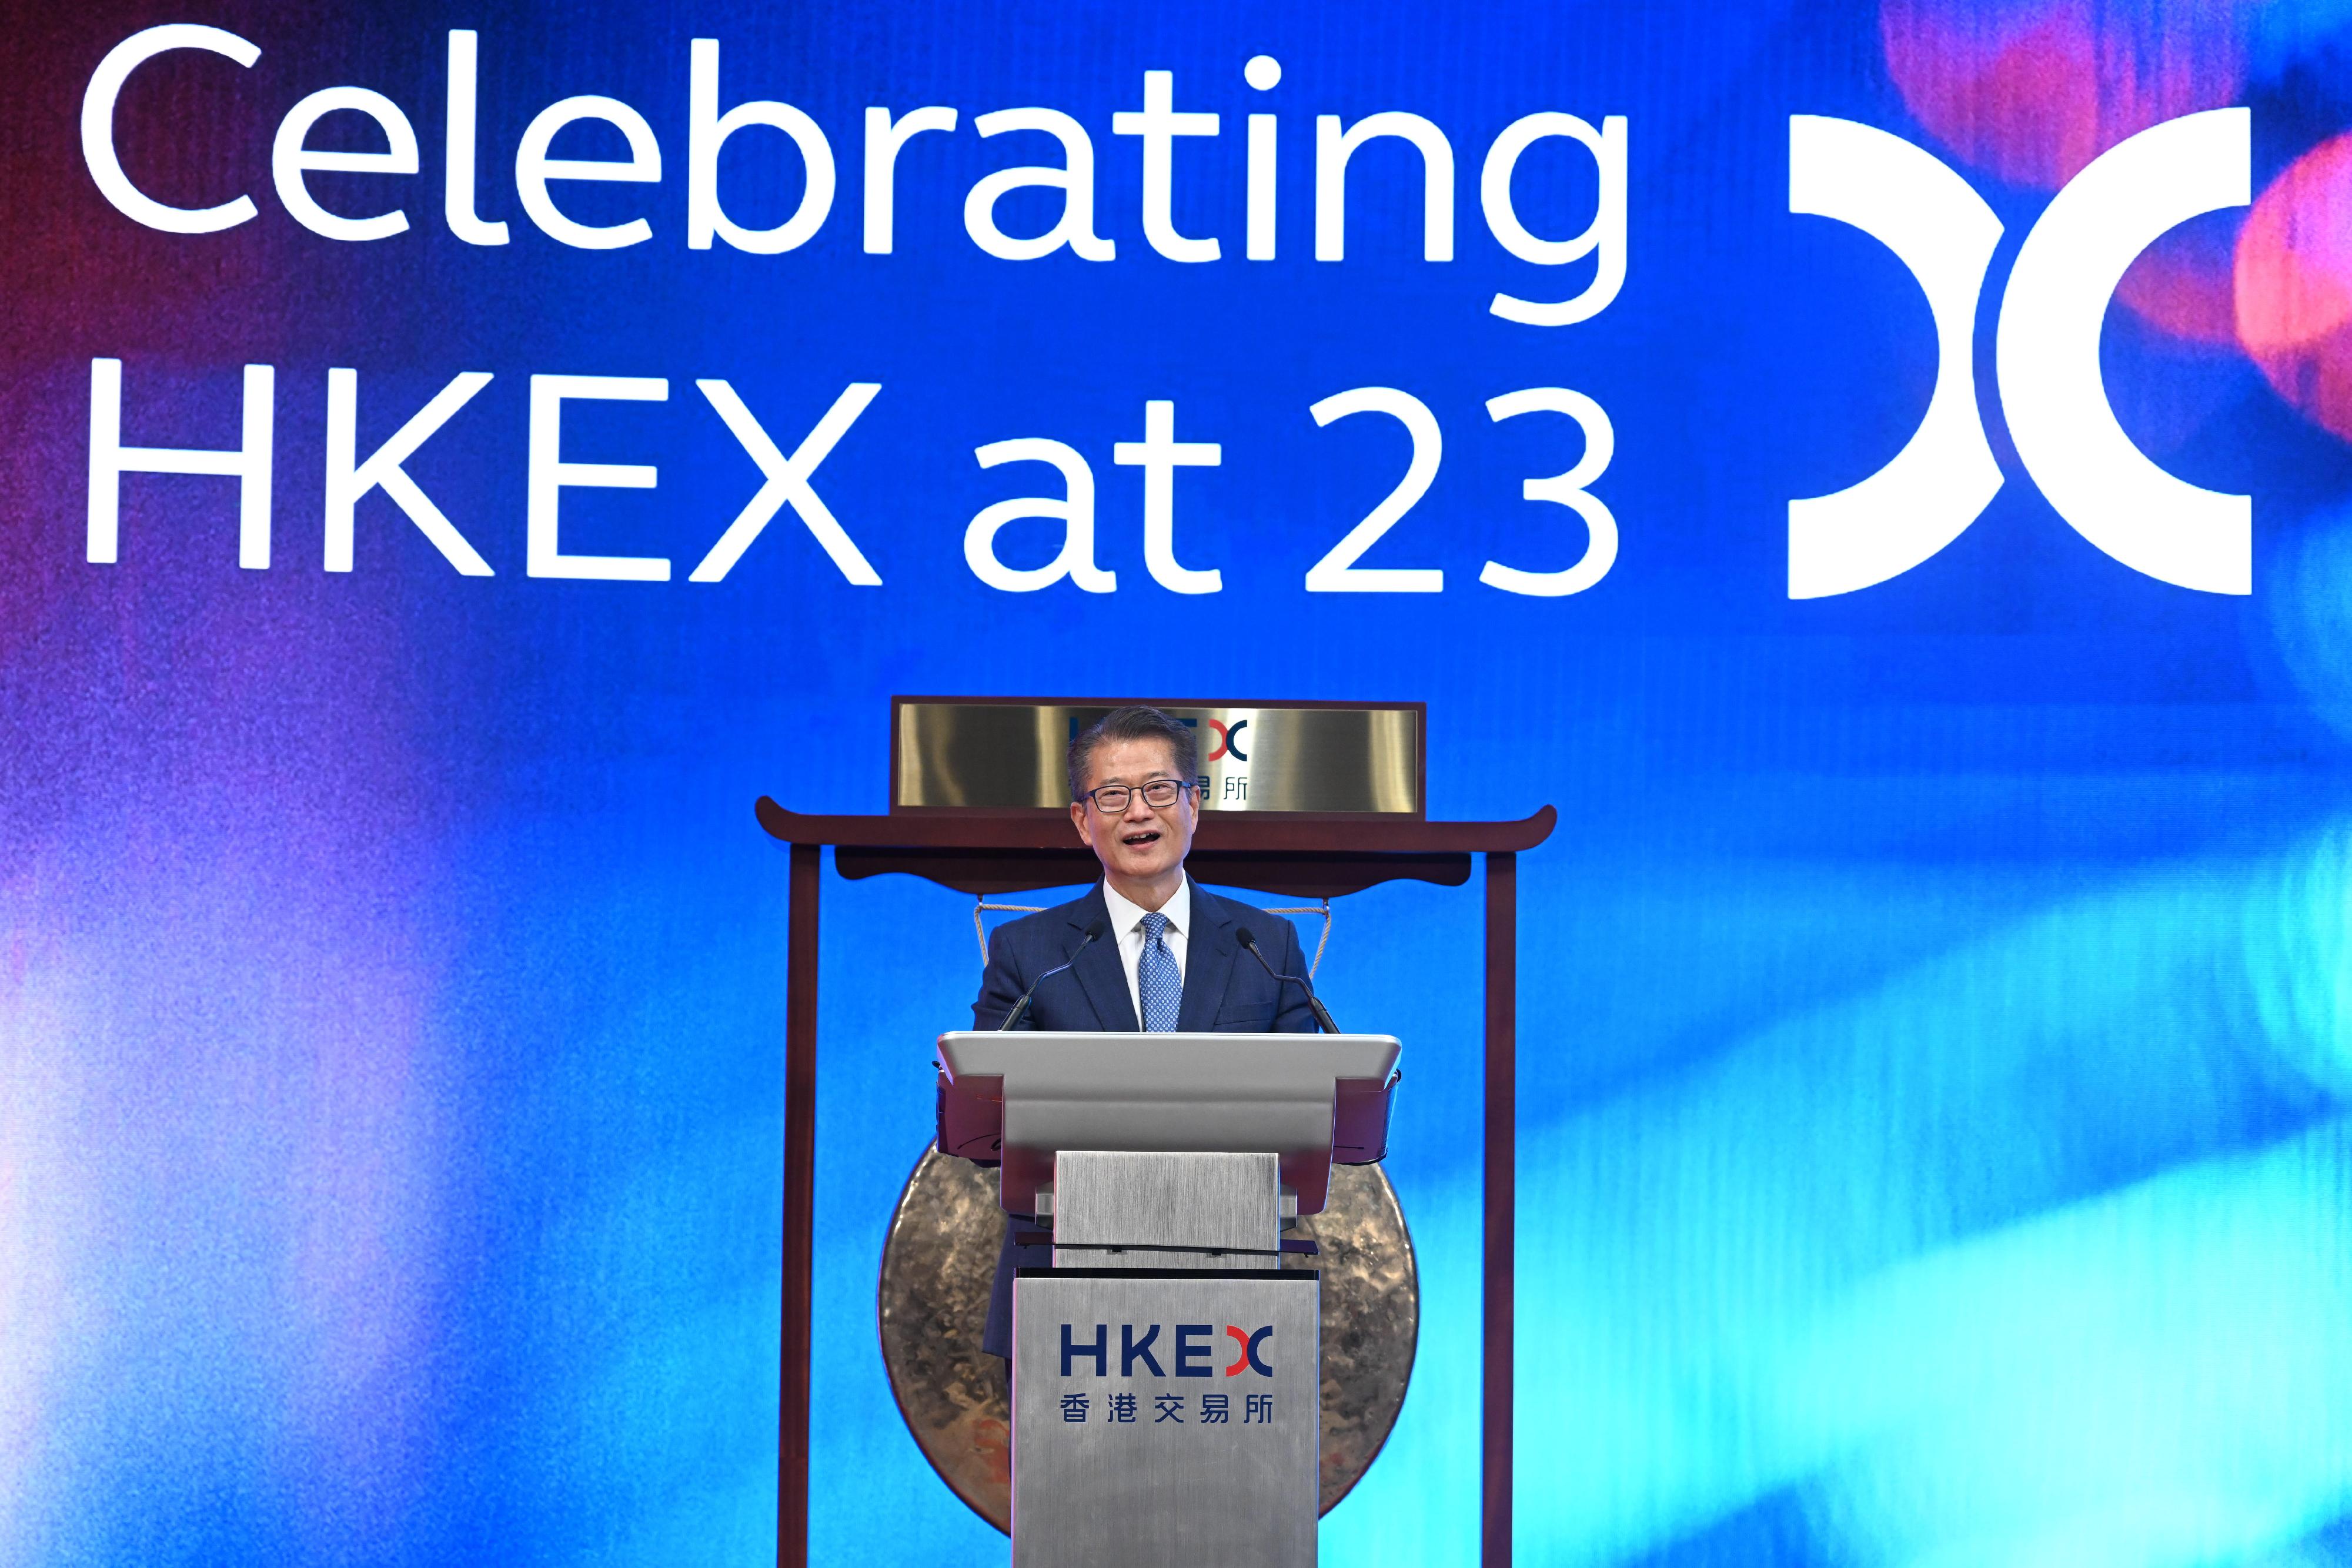 The Financial Secretary, Mr Paul Chan, speaks at the Hong Kong Exchanges and Clearing Limited 23rd Anniversary Celebrations today (June 14).